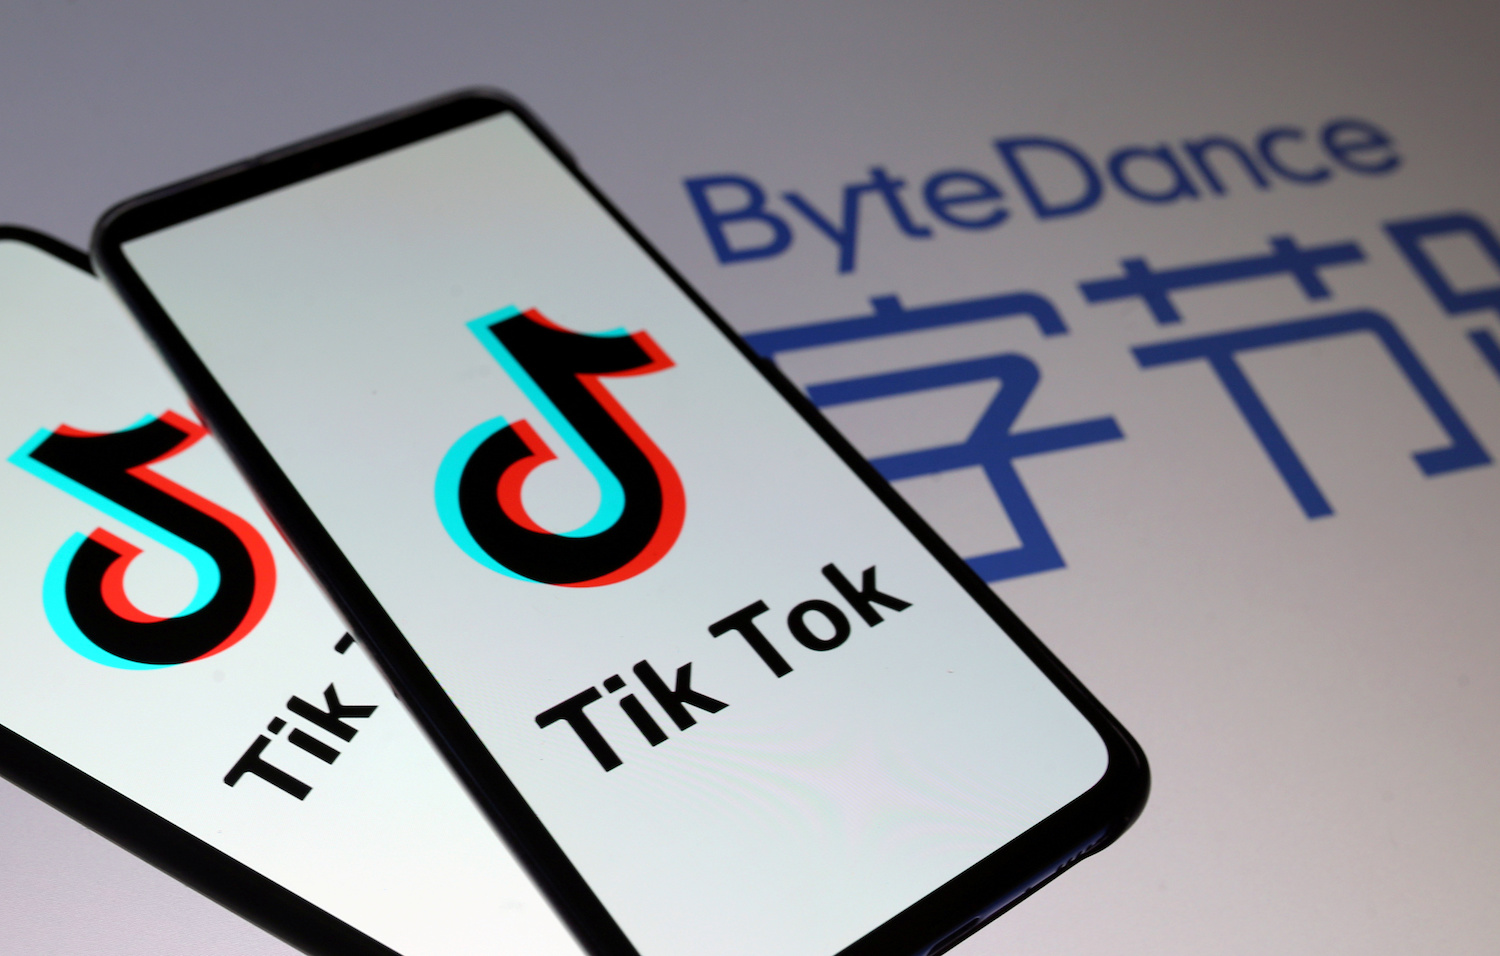 Tik Tok logos are seen on smartphones in front of a displayed ByteDance logo in this illustration